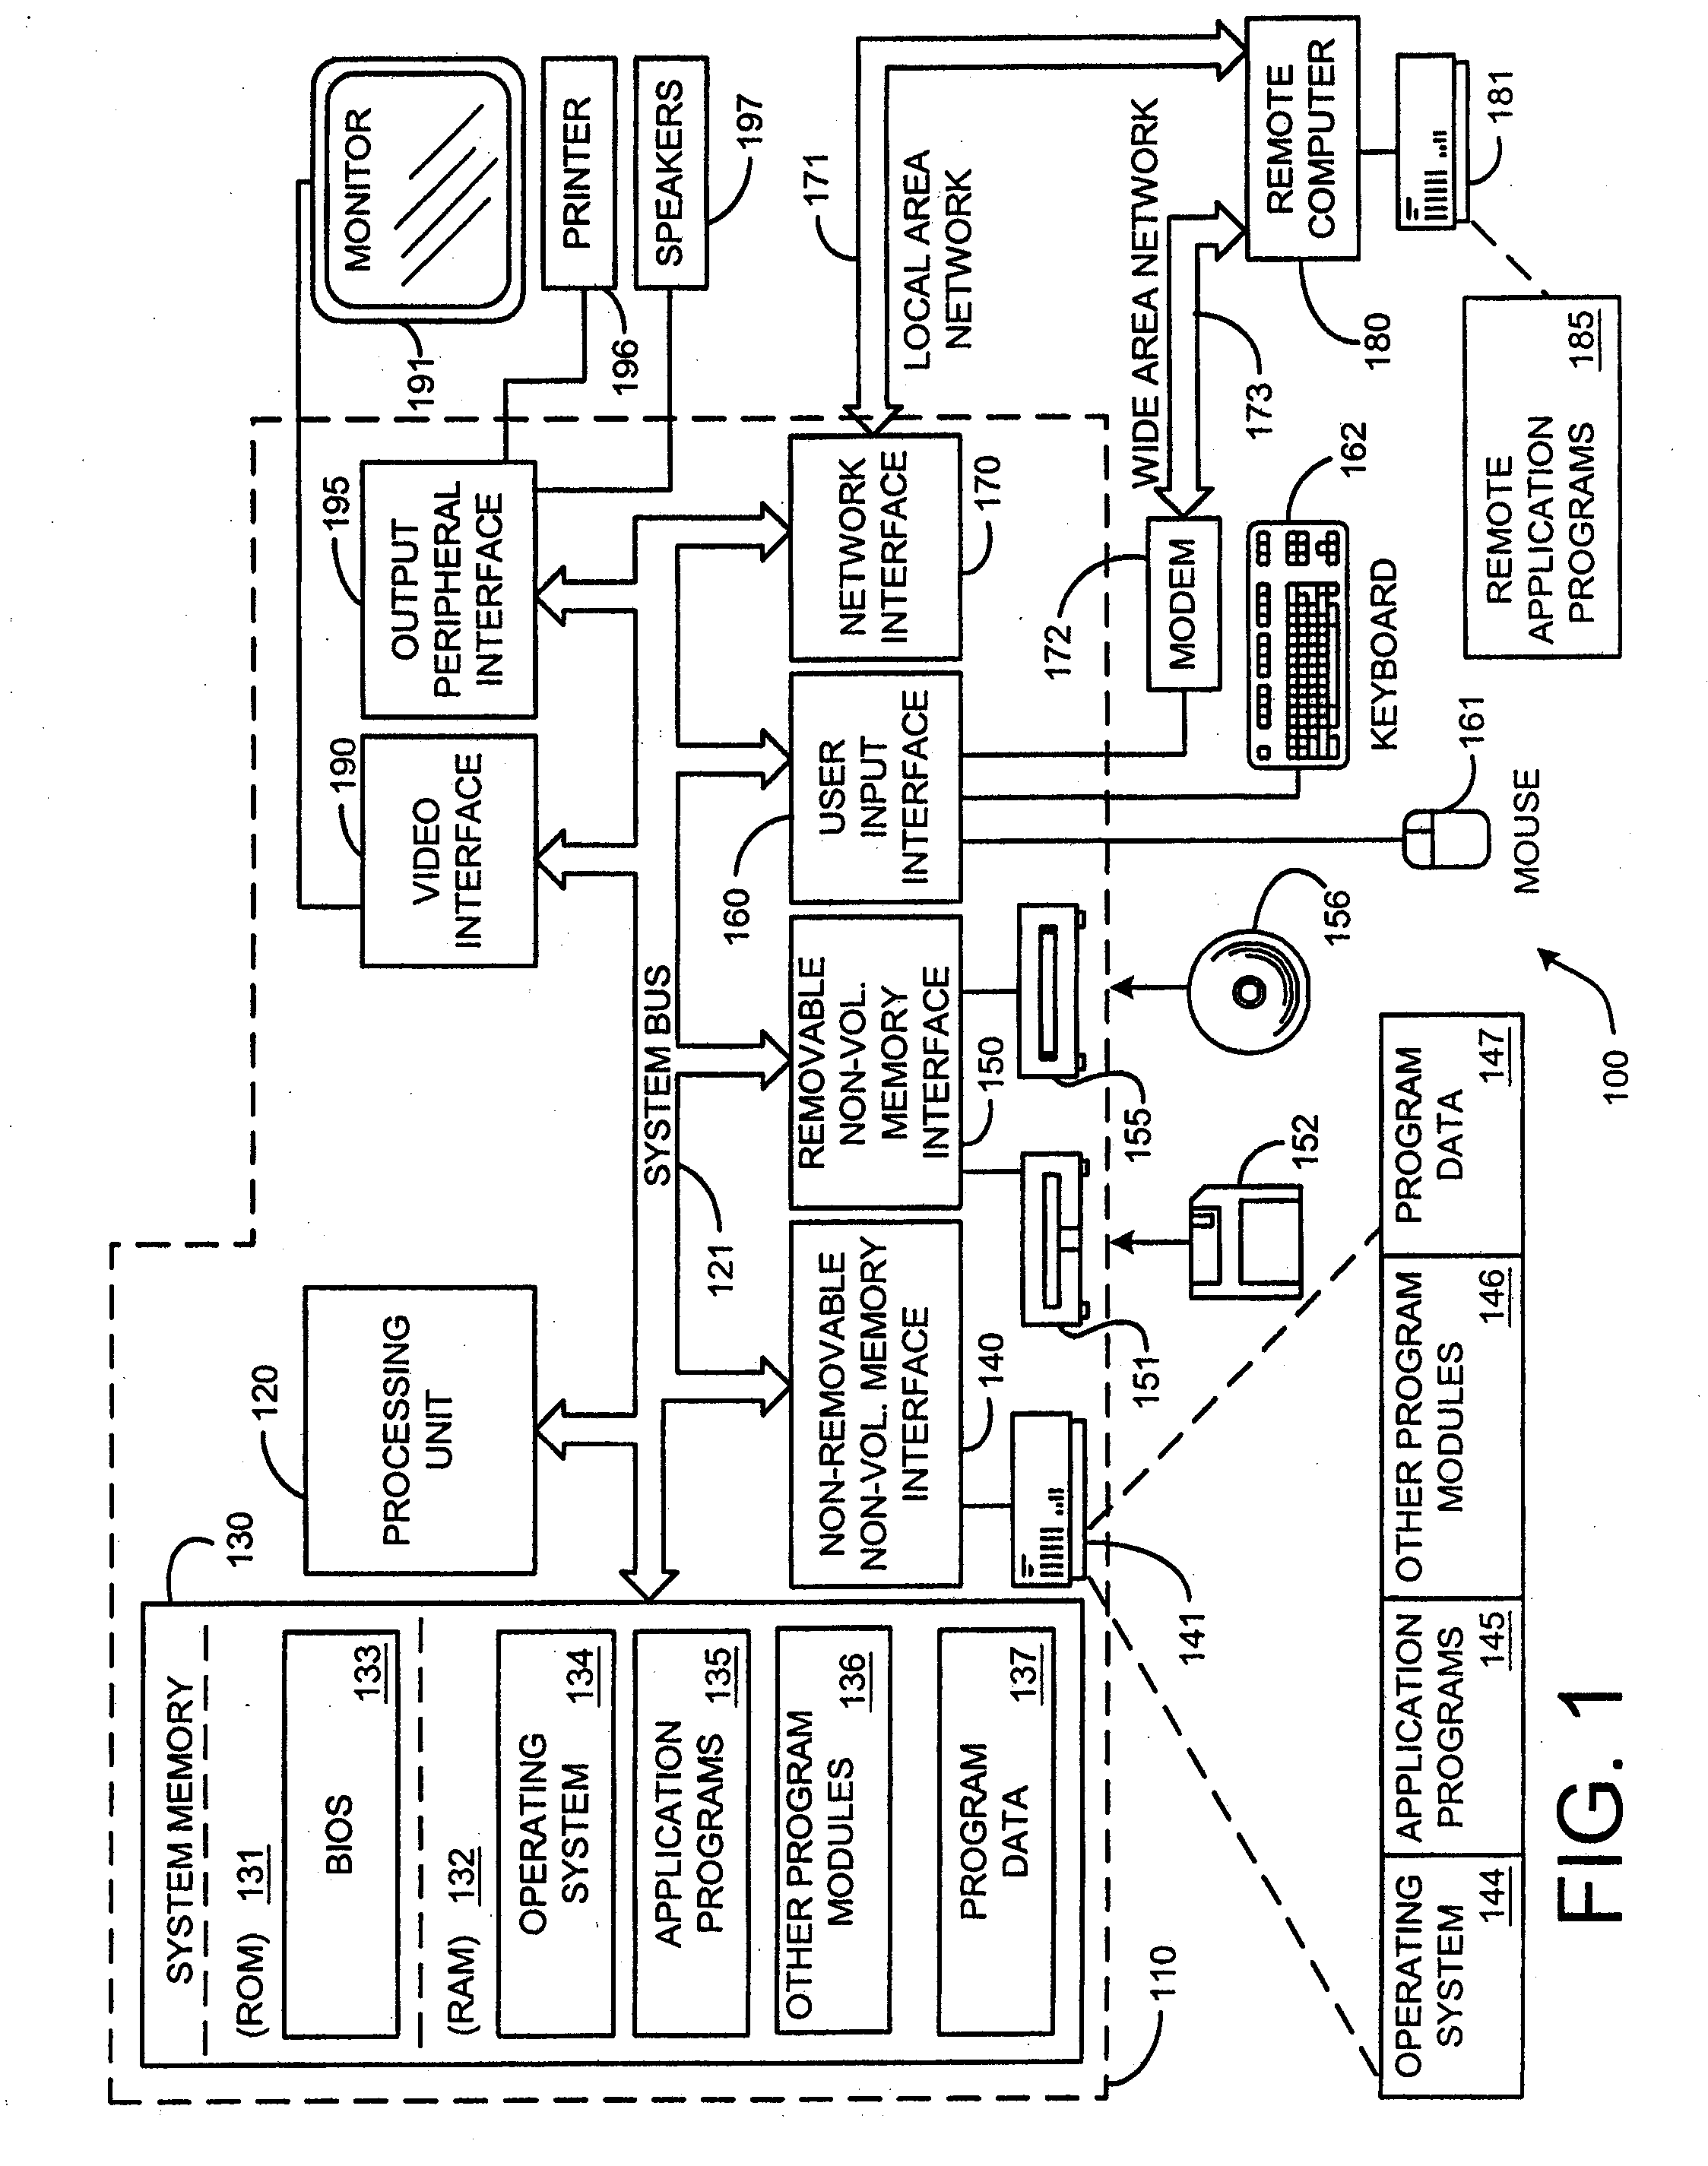 Enhanced telephony computer user interface allowing user interaction and control of a telephone using a personal computer